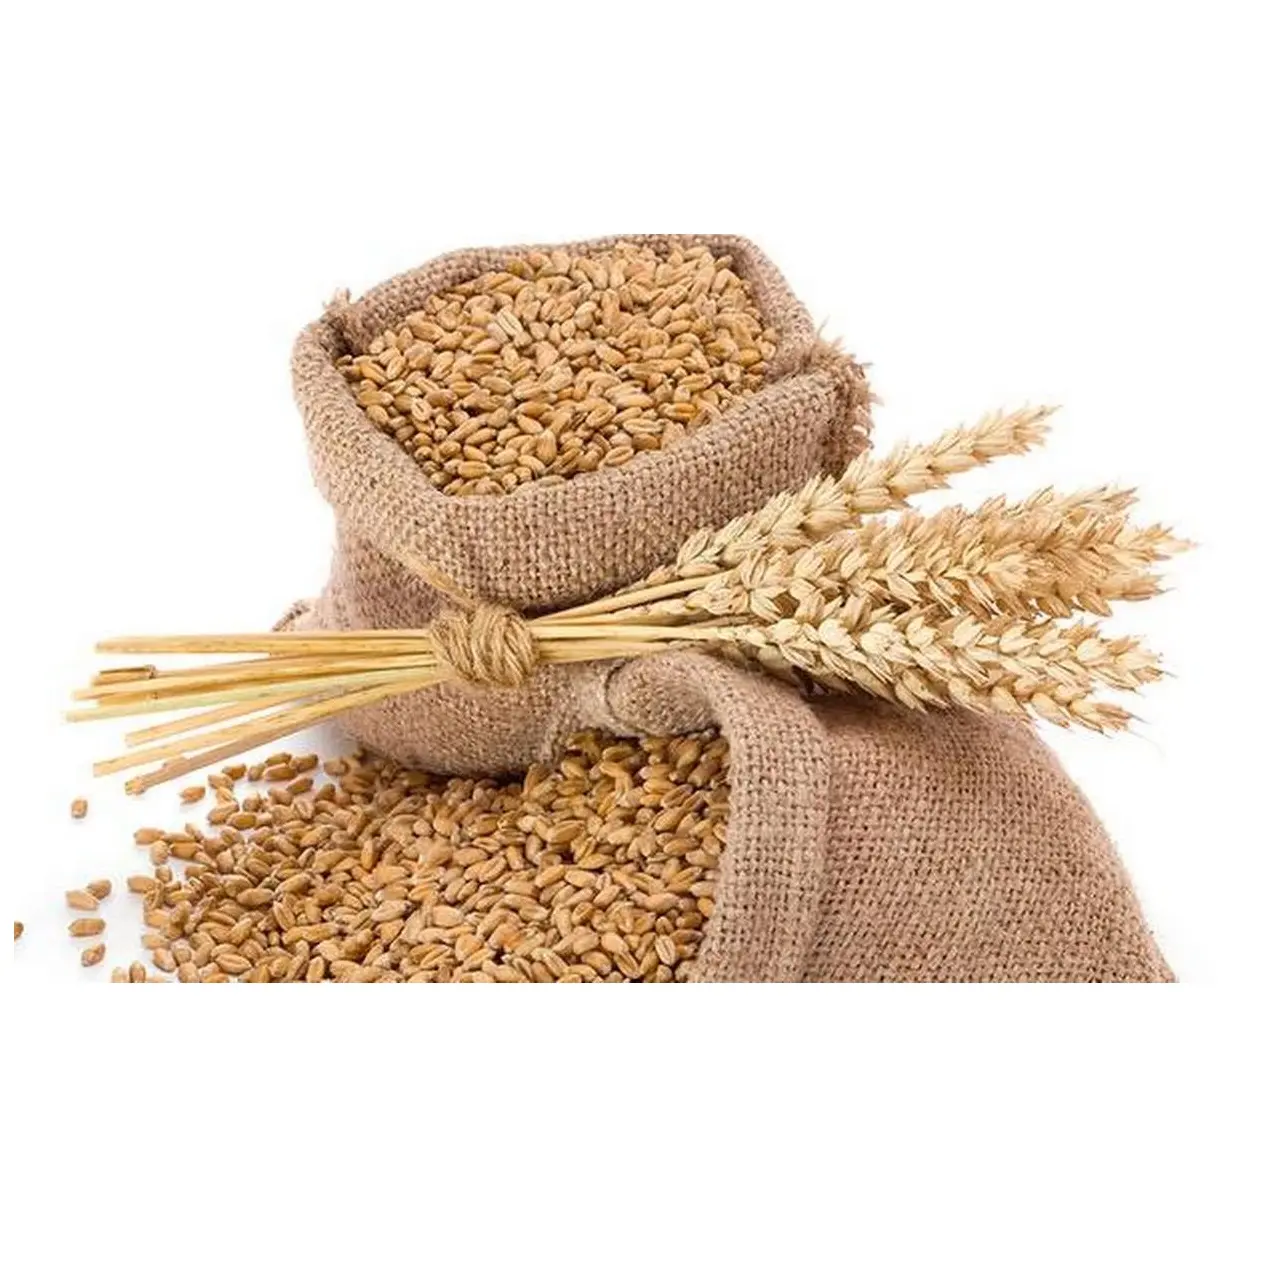 Durum Dried Hard Wheat Grain Milling Soft Wheat from Canada and Italy Nuturally Grown Bulgur Wheat